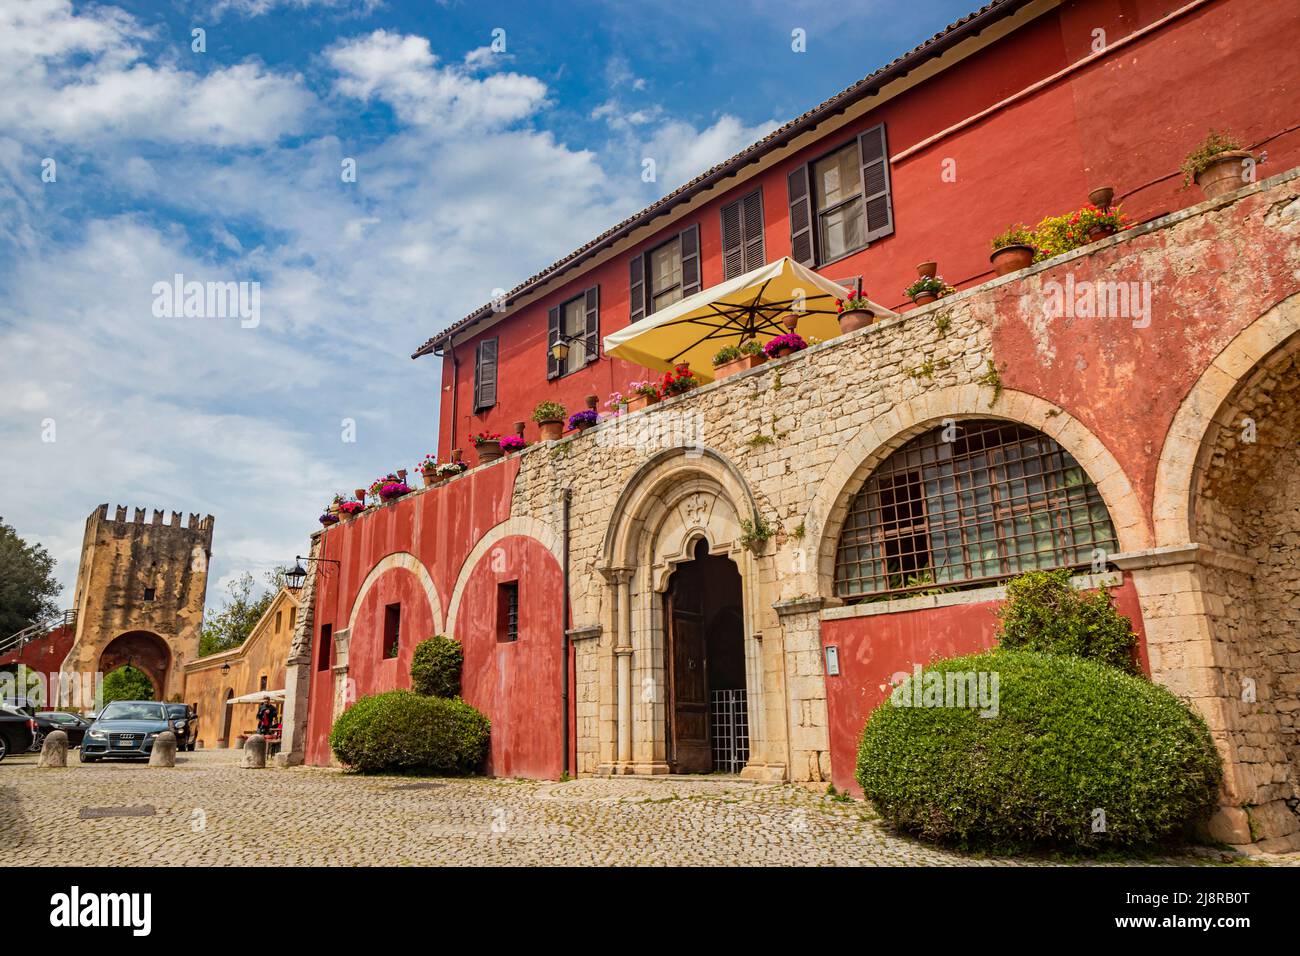 May 1, 2022 - Priverno, Latina, Lazio, Italy - The Fossanova Abbey. The ancient buildings of the small medieval village built around the monastery. Th Stock Photo